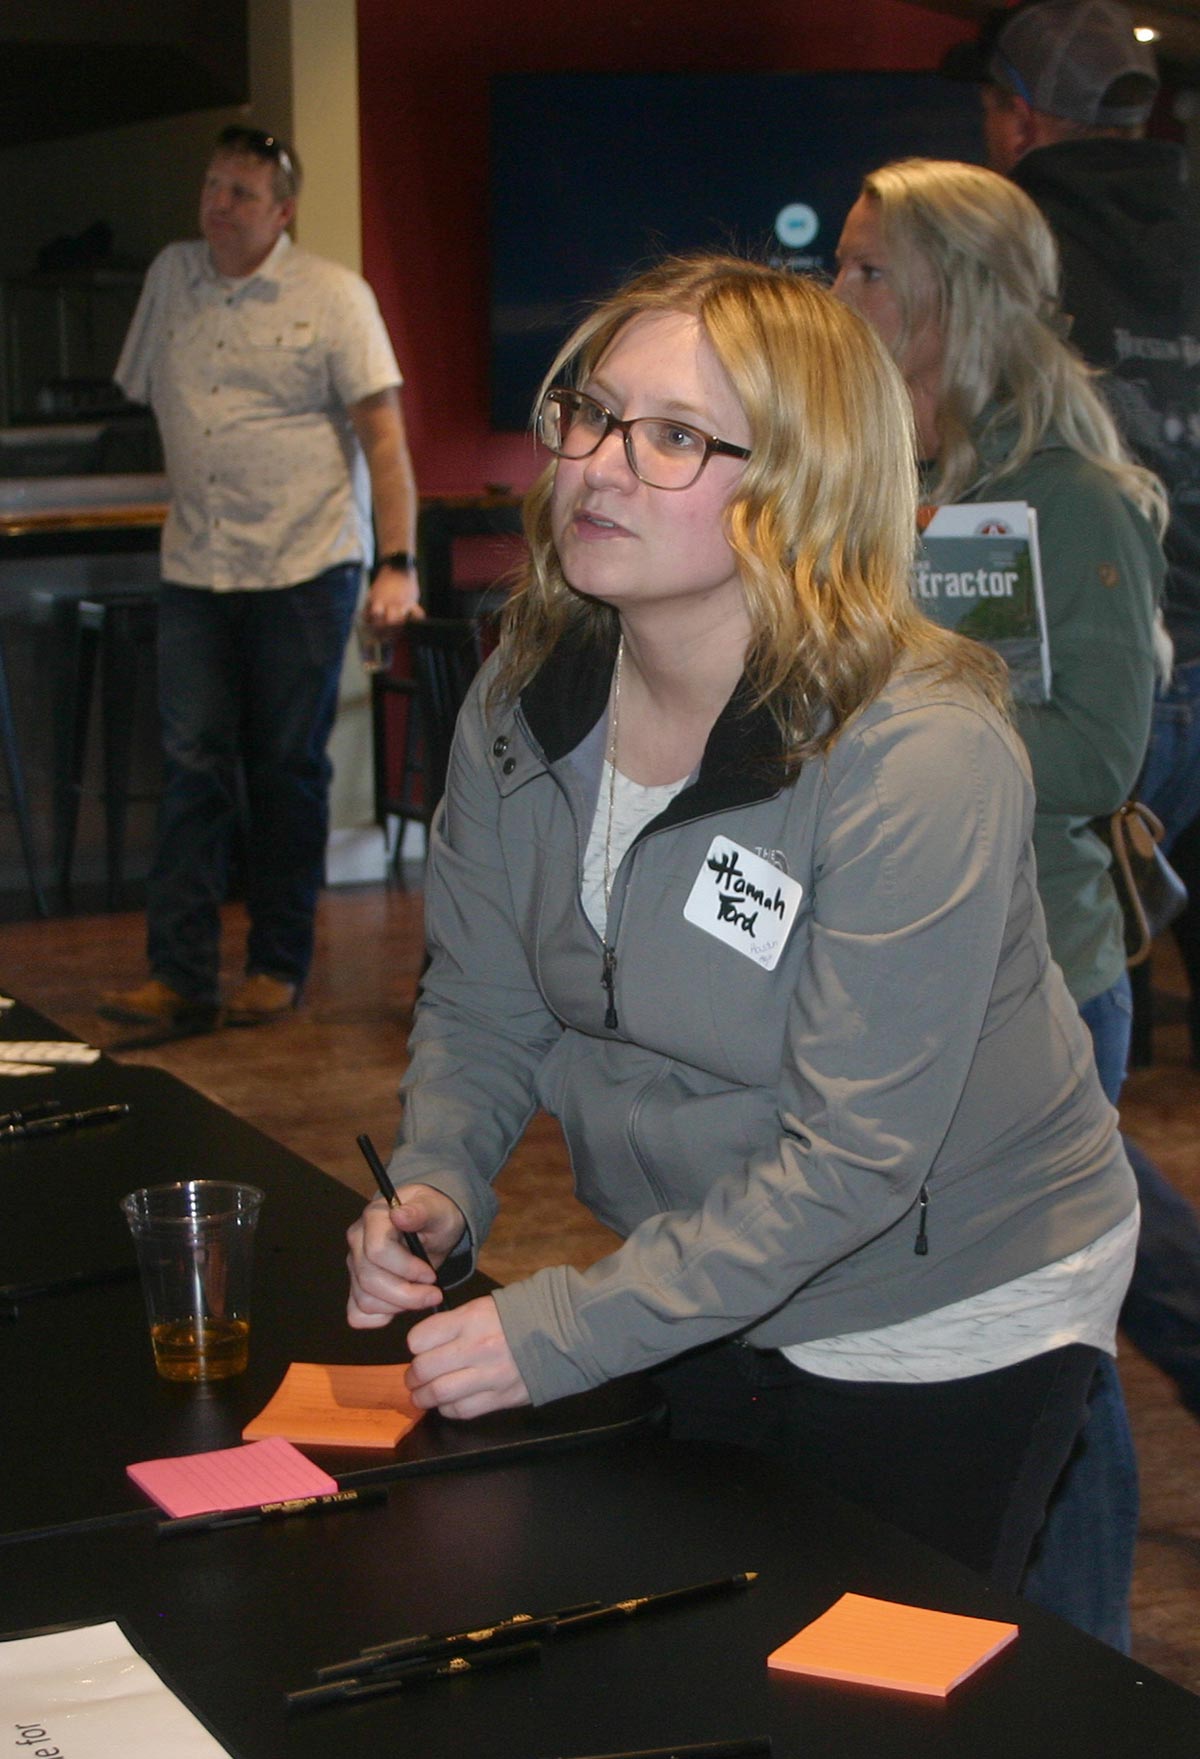 A woman examines a placard question on the wall as she has a pen in her right hand and a nearby plastic cup filled with liquid inside plus an orange sticky note ready to respond with an answer to the placard question